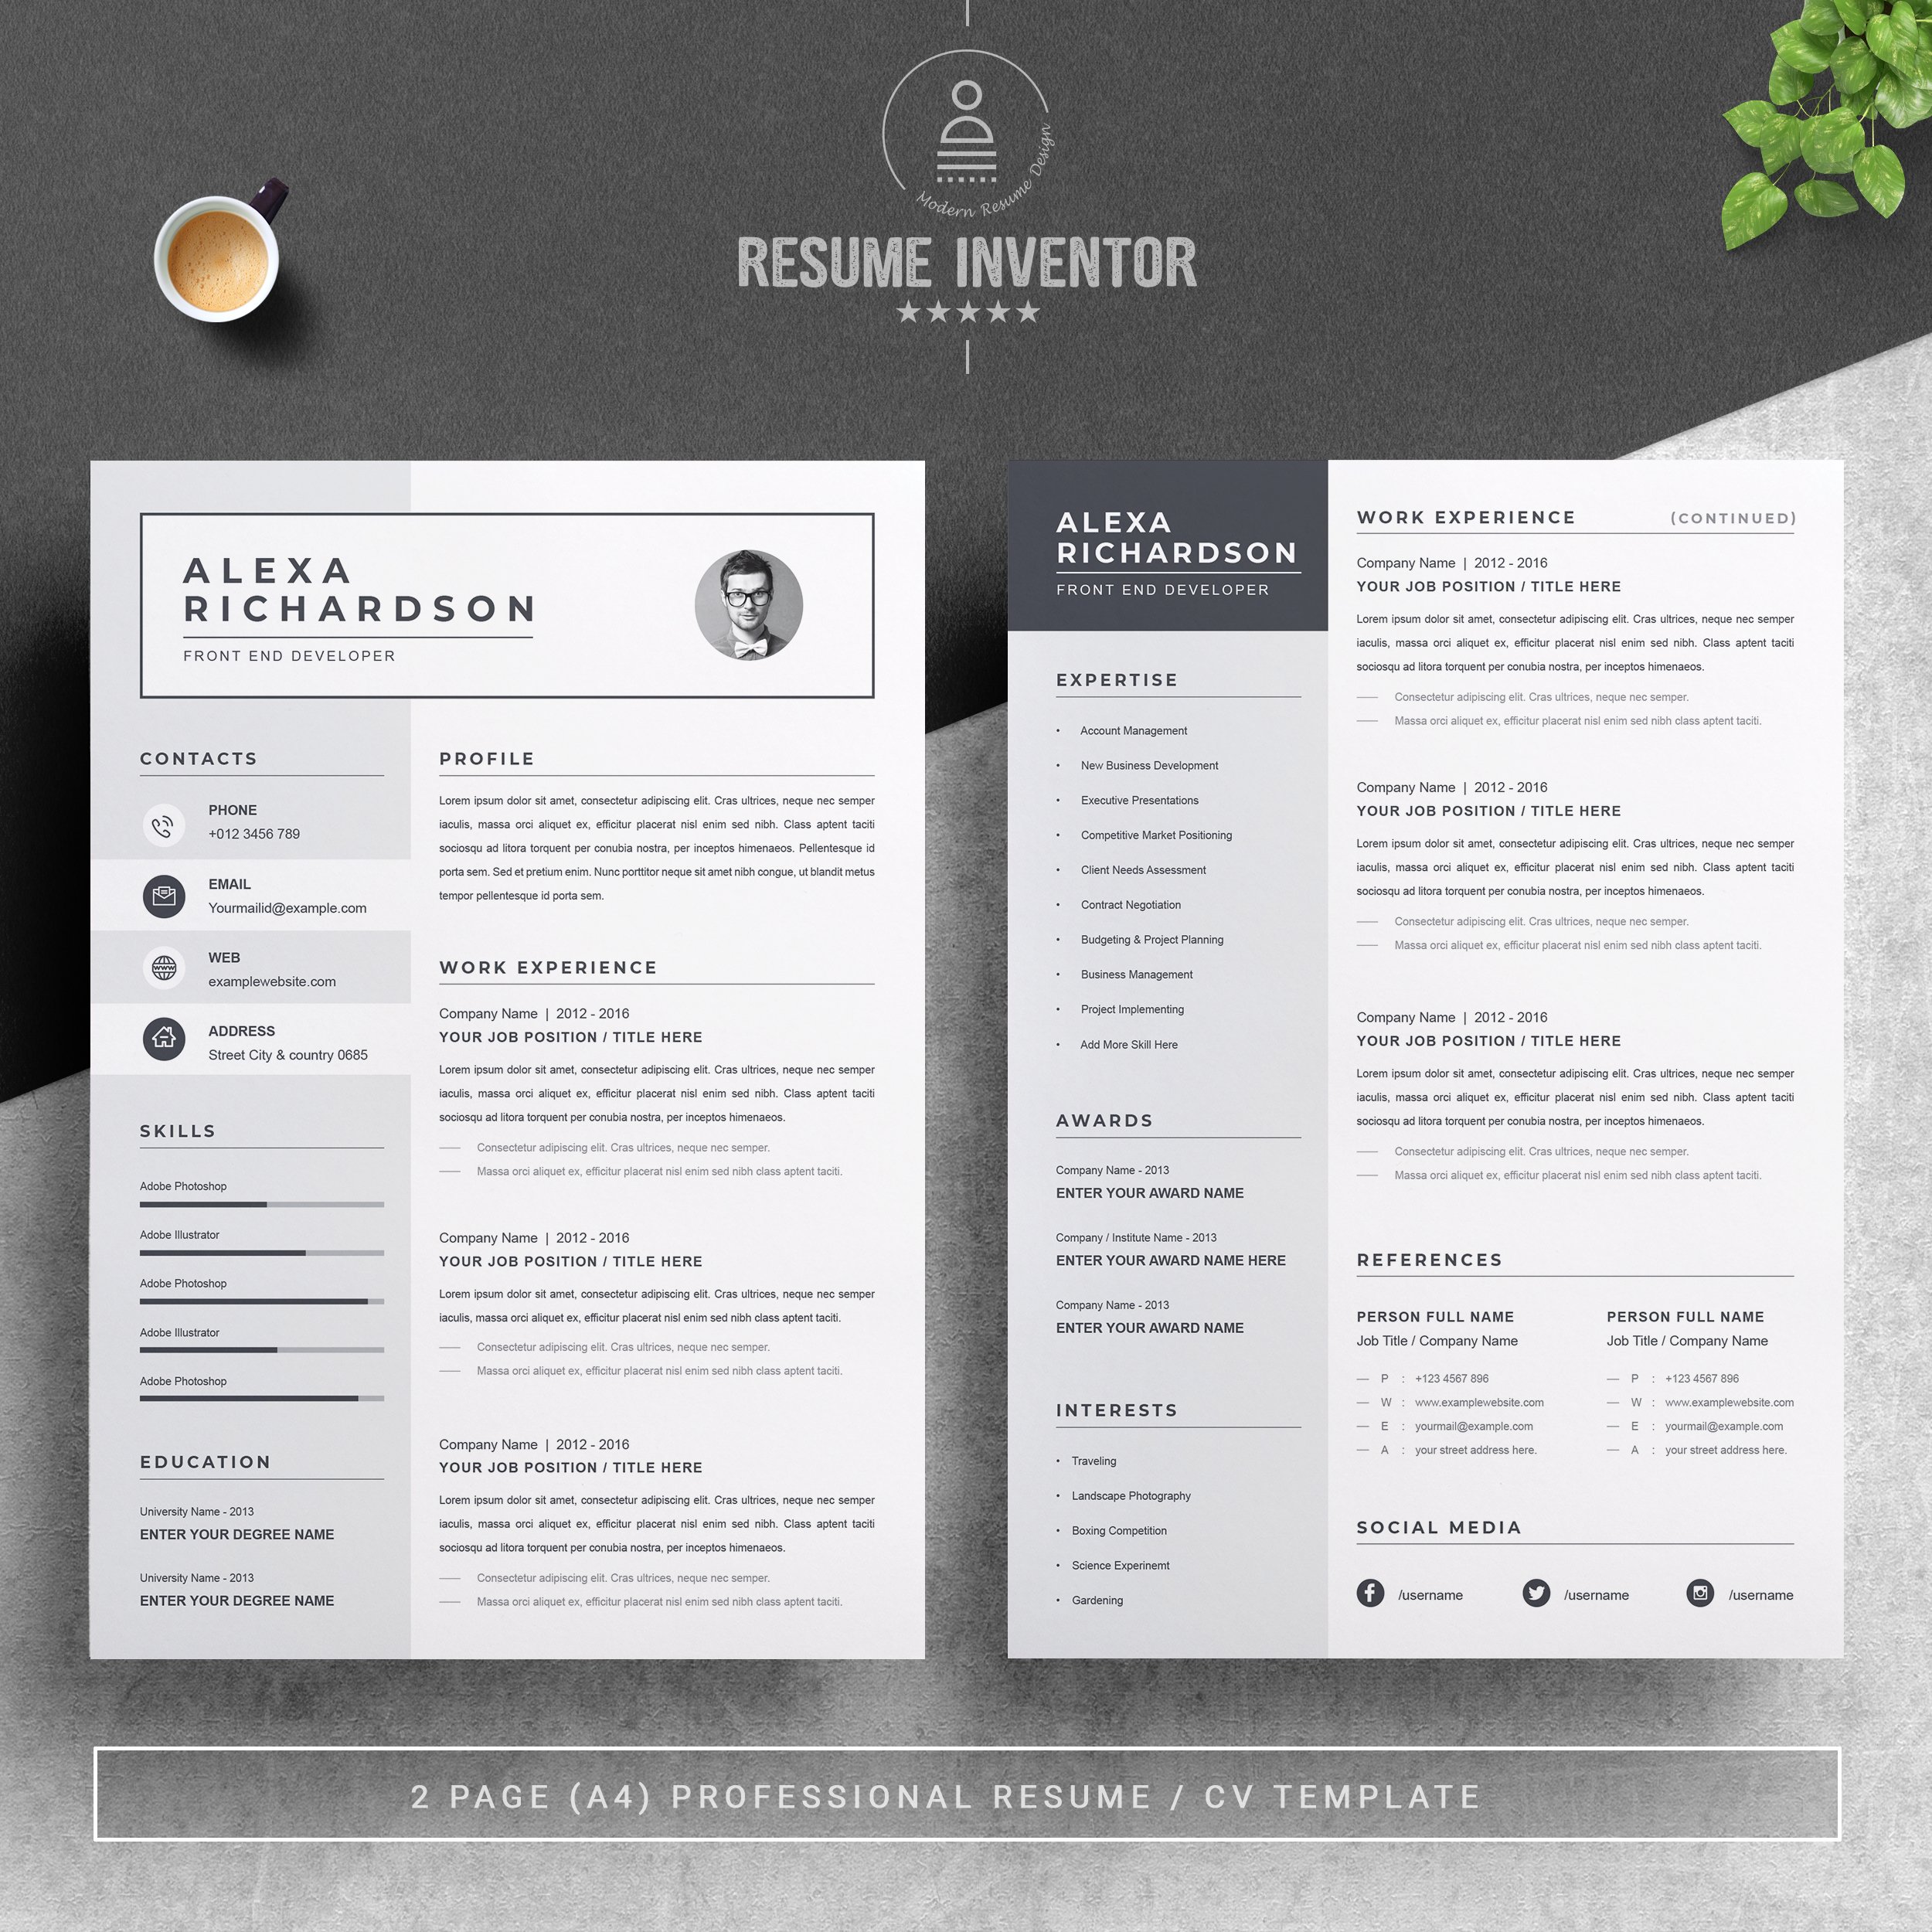 Resume/CV Design Template | MS Word preview image.